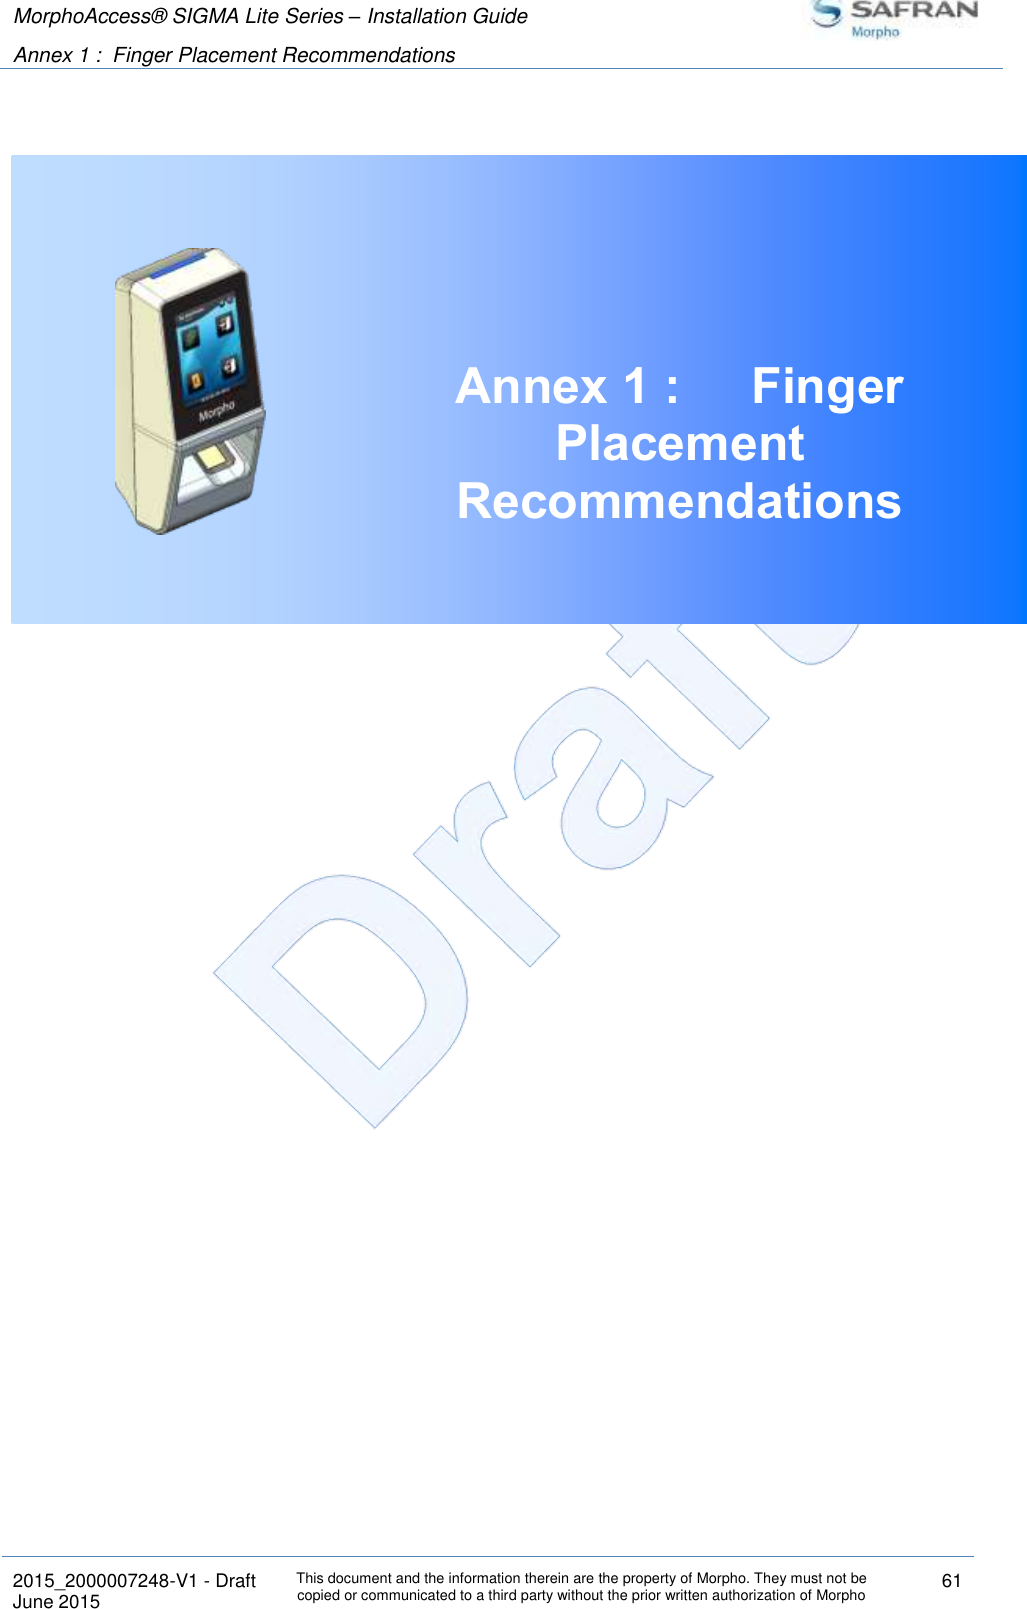 MorphoAccess® SIGMA Lite Series – Installation Guide  Annex 1 :  Finger Placement Recommendations   2015_2000007248-V1 - Draft This document and the information therein are the property of Morpho. They must not be copied or communicated to a third party without the prior written authorization of Morpho 61 June 2015    Annex 1 :  Finger Placement Recommendations     